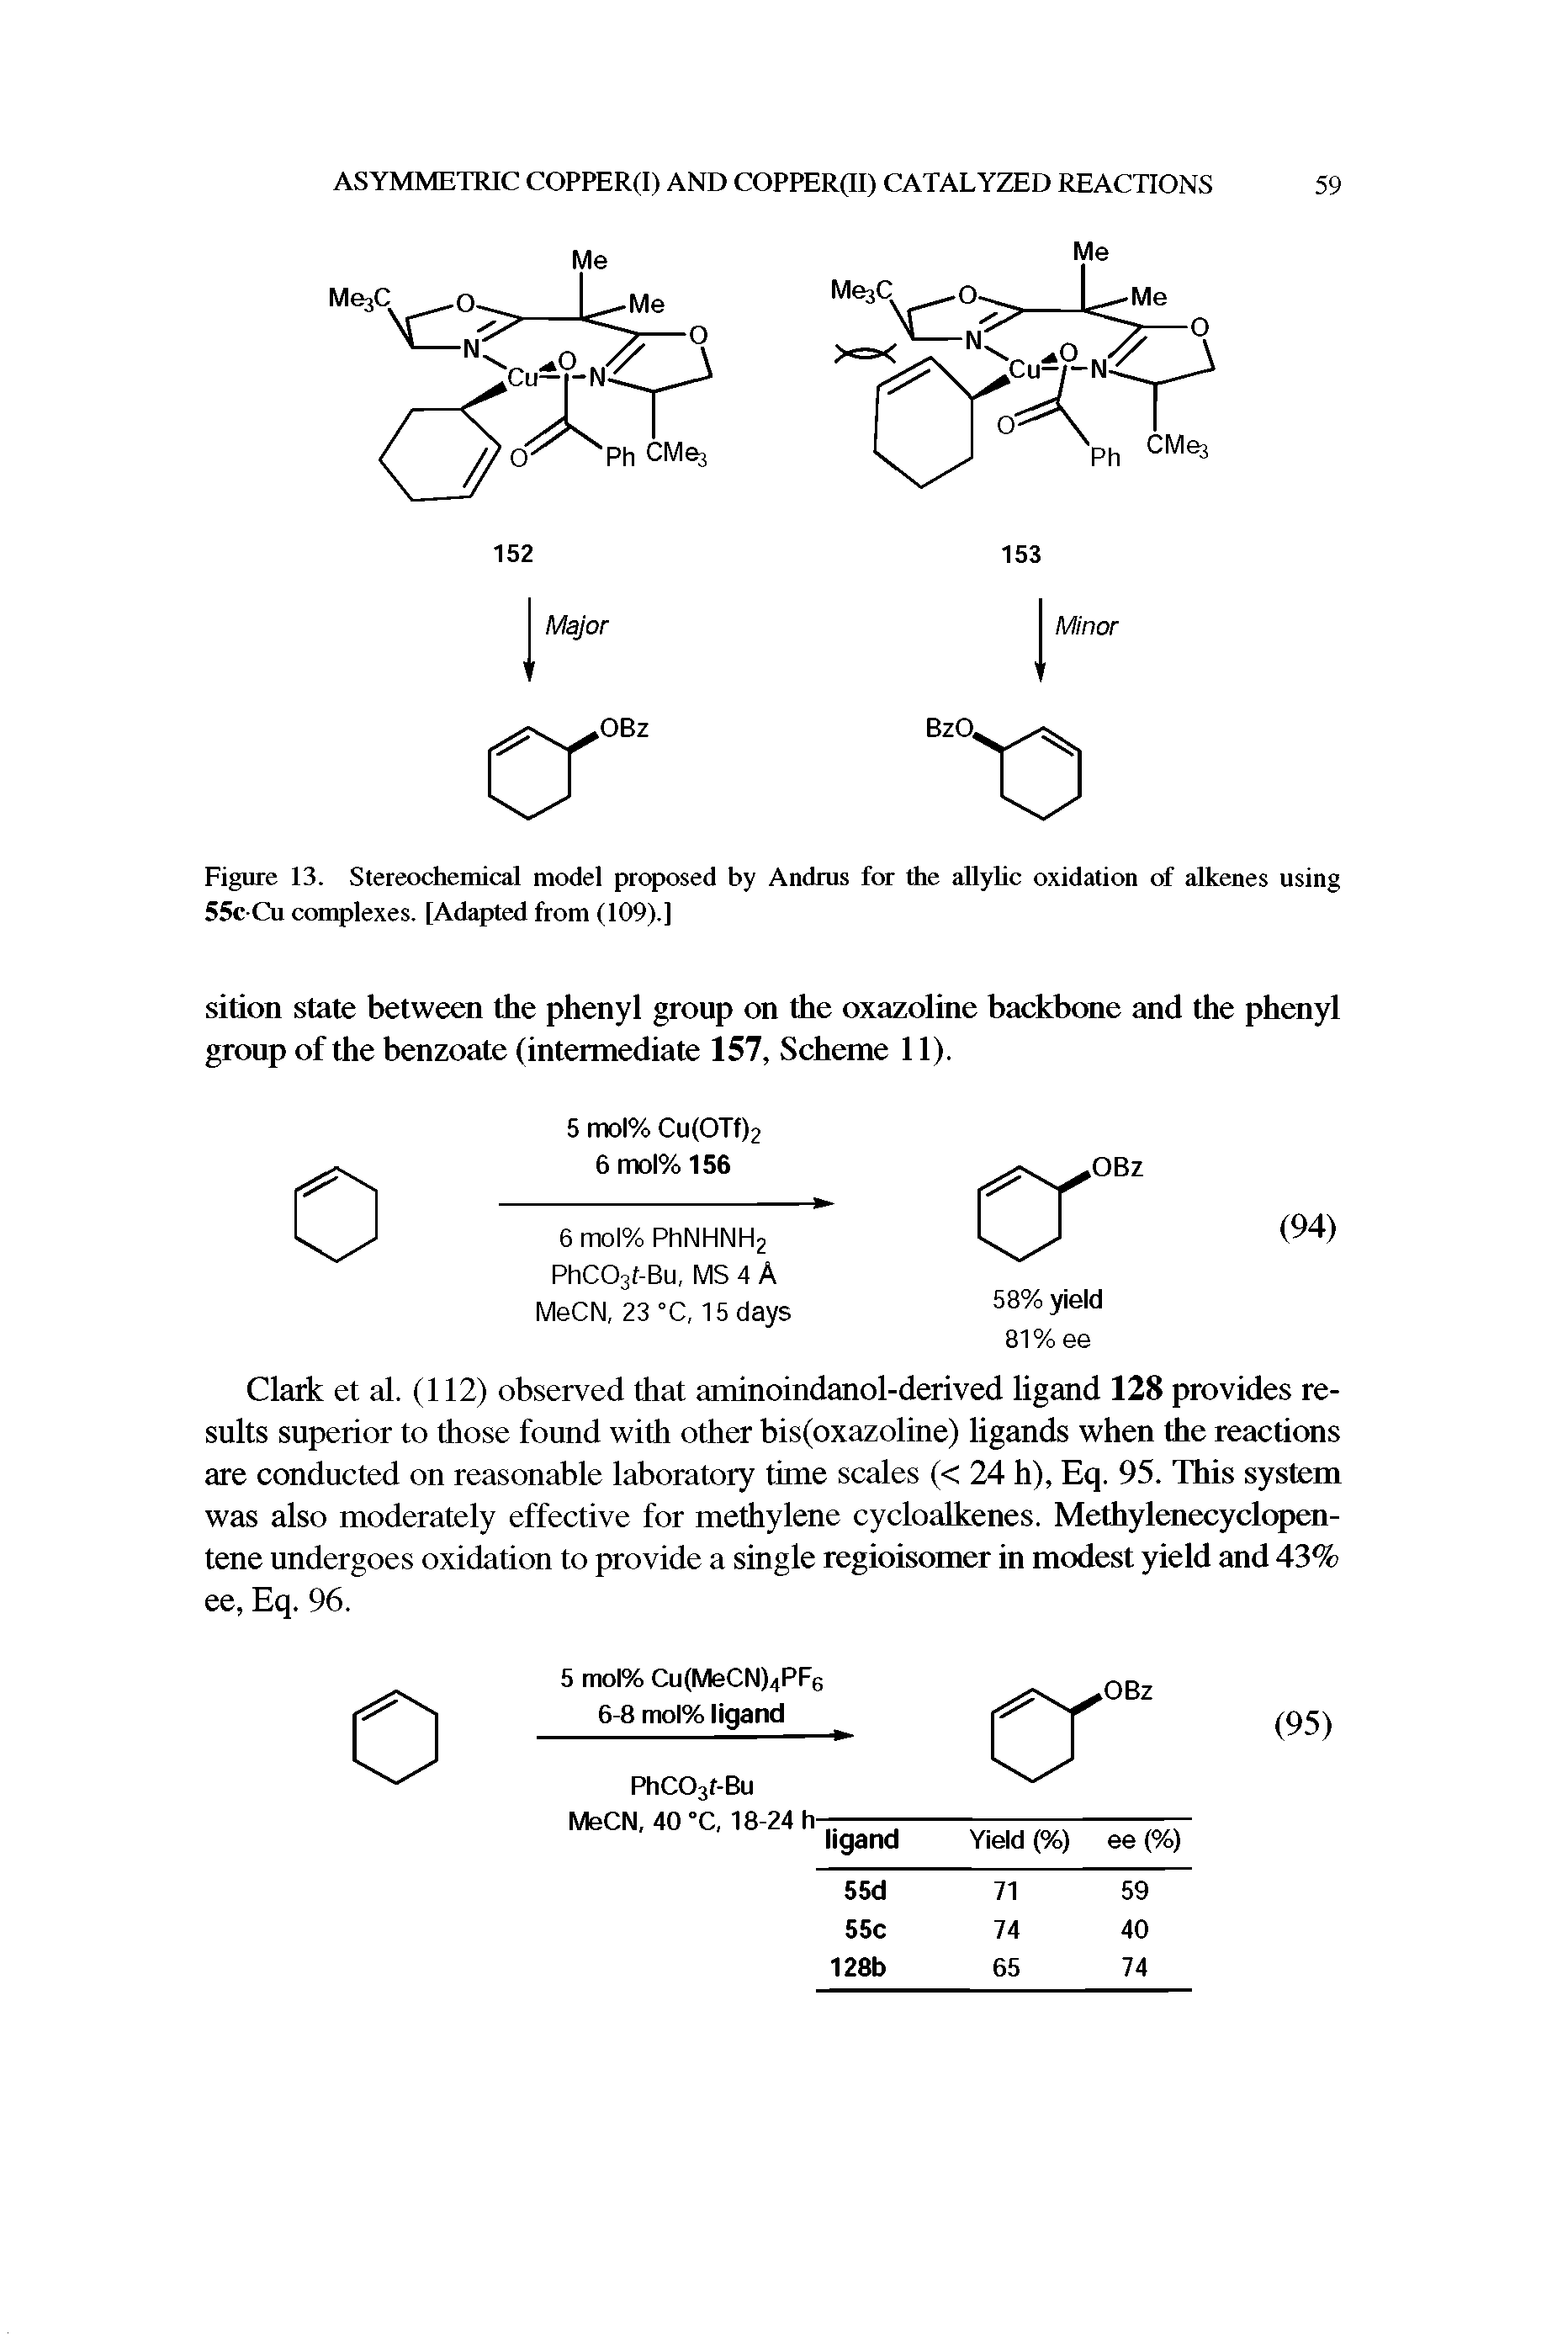 Figure 13. Stereochemical model proposed by Andrus for the allylic oxidation of alkenes using 55c Cu complexes. [Adapted from (109).]...